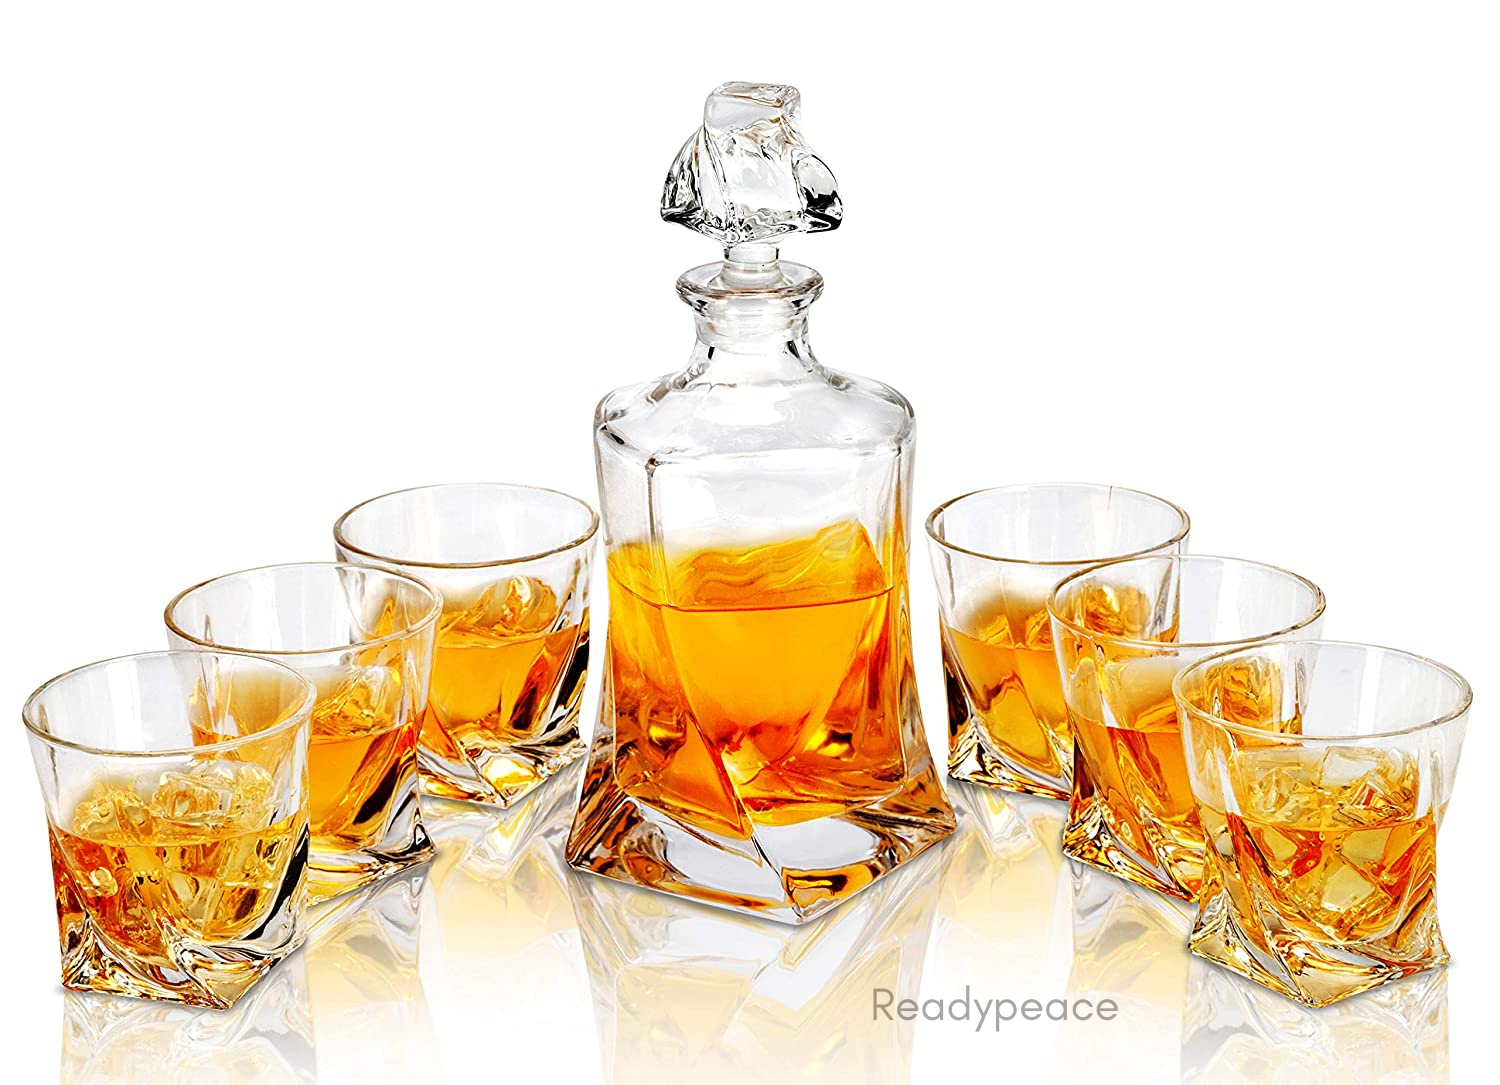 The Epic Twist 7 Pcs Crystal Decanter Set with Glasses